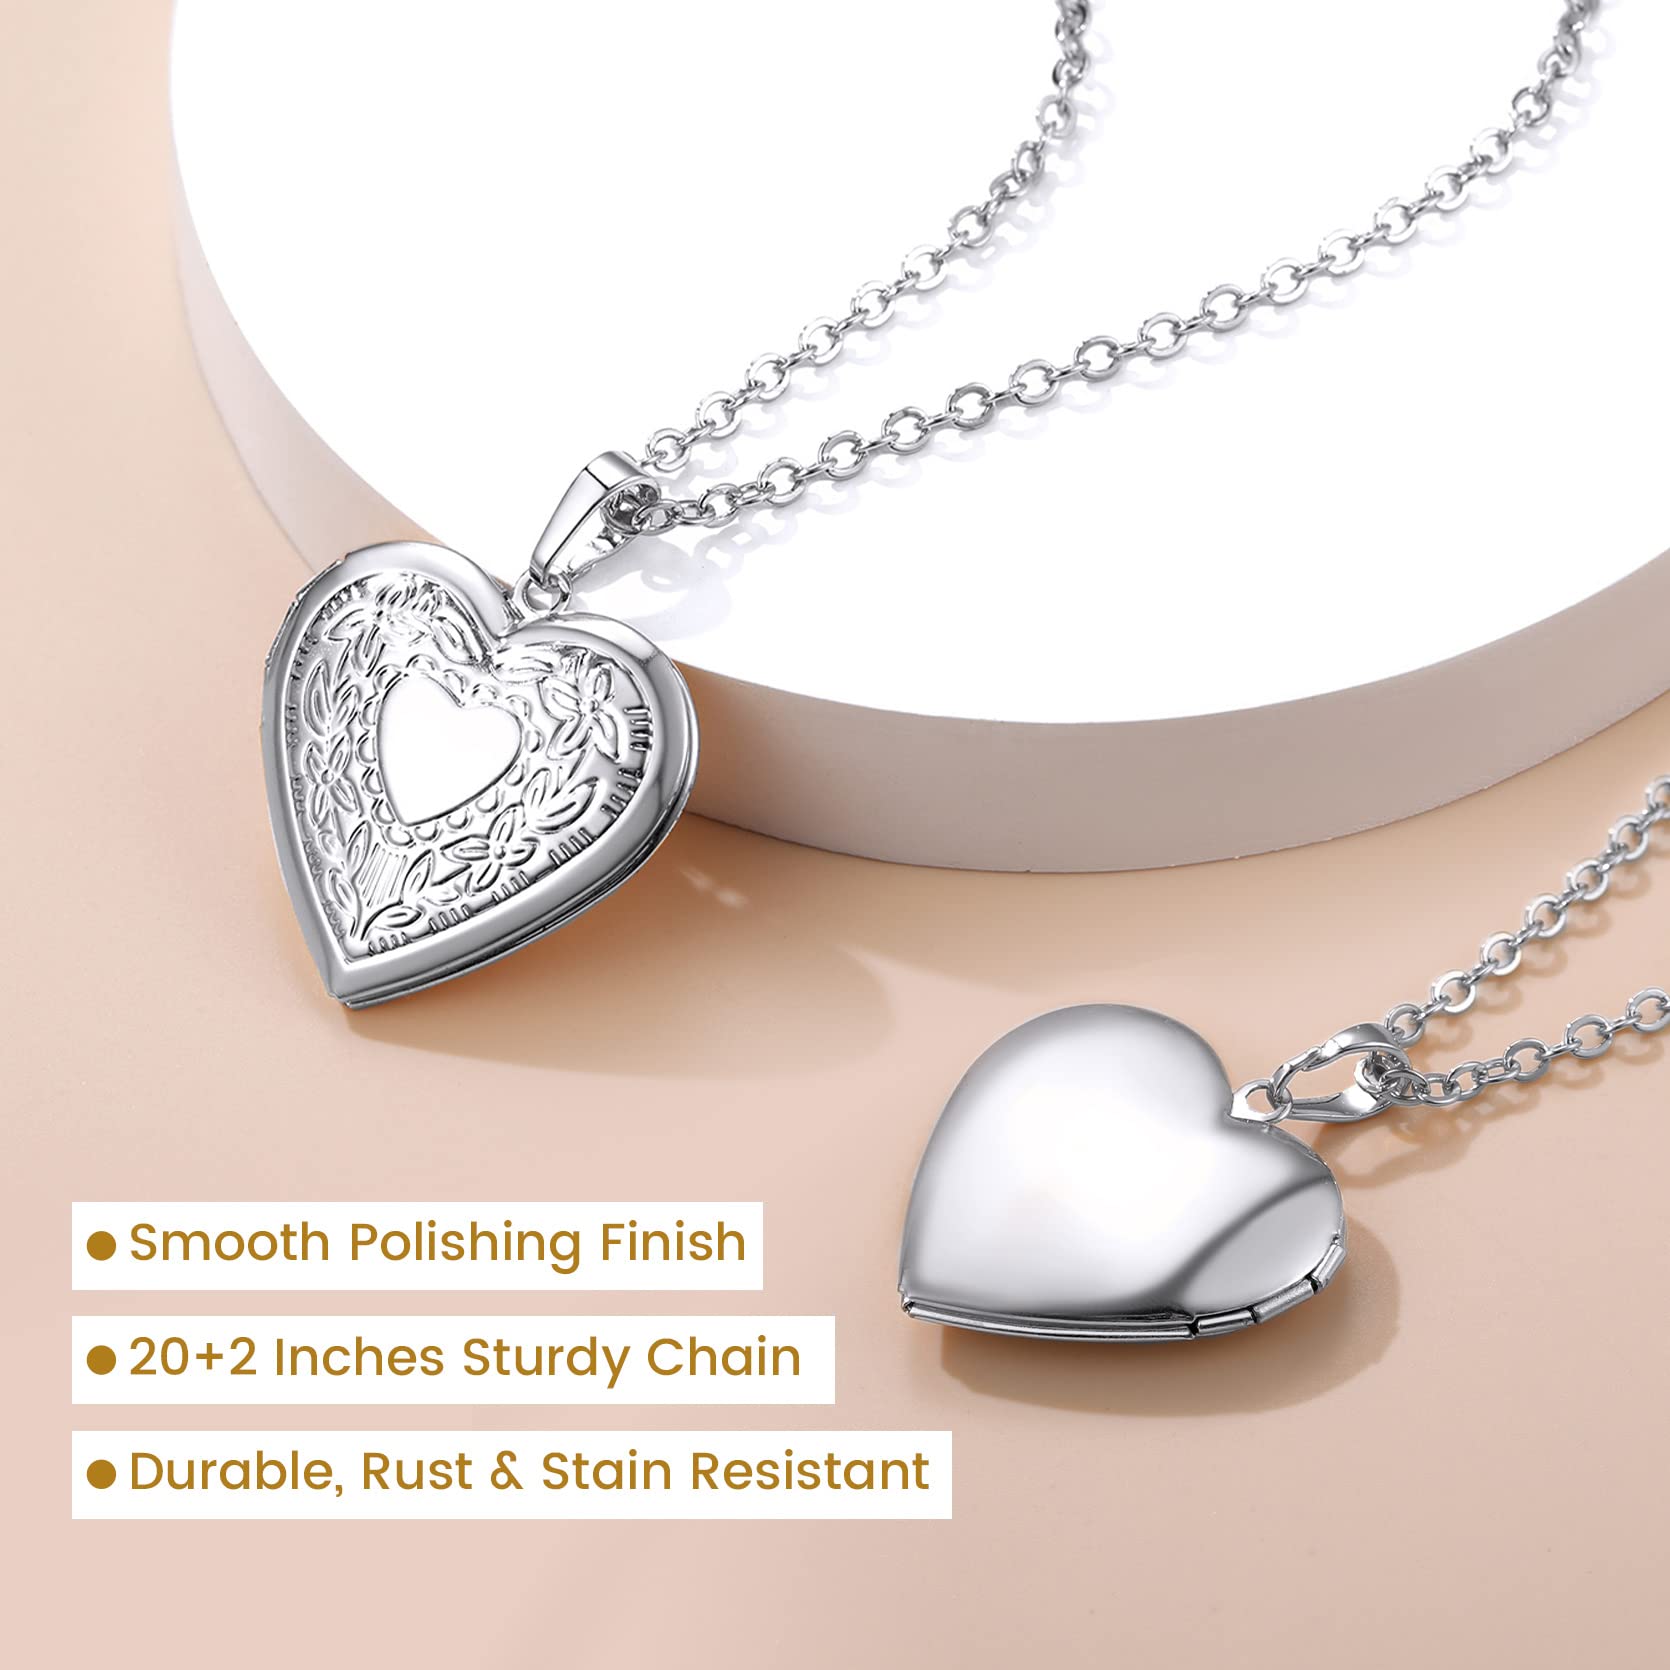 GOLDCHIC JEWELRY Heart Locket Necklace for Women, 18K Gold Plated/Platinum Plated/Rose Gold Flower/Tree of Life Memorial Photo Locket Necklace with Picture with 20”+2” Chain, with Gift Box